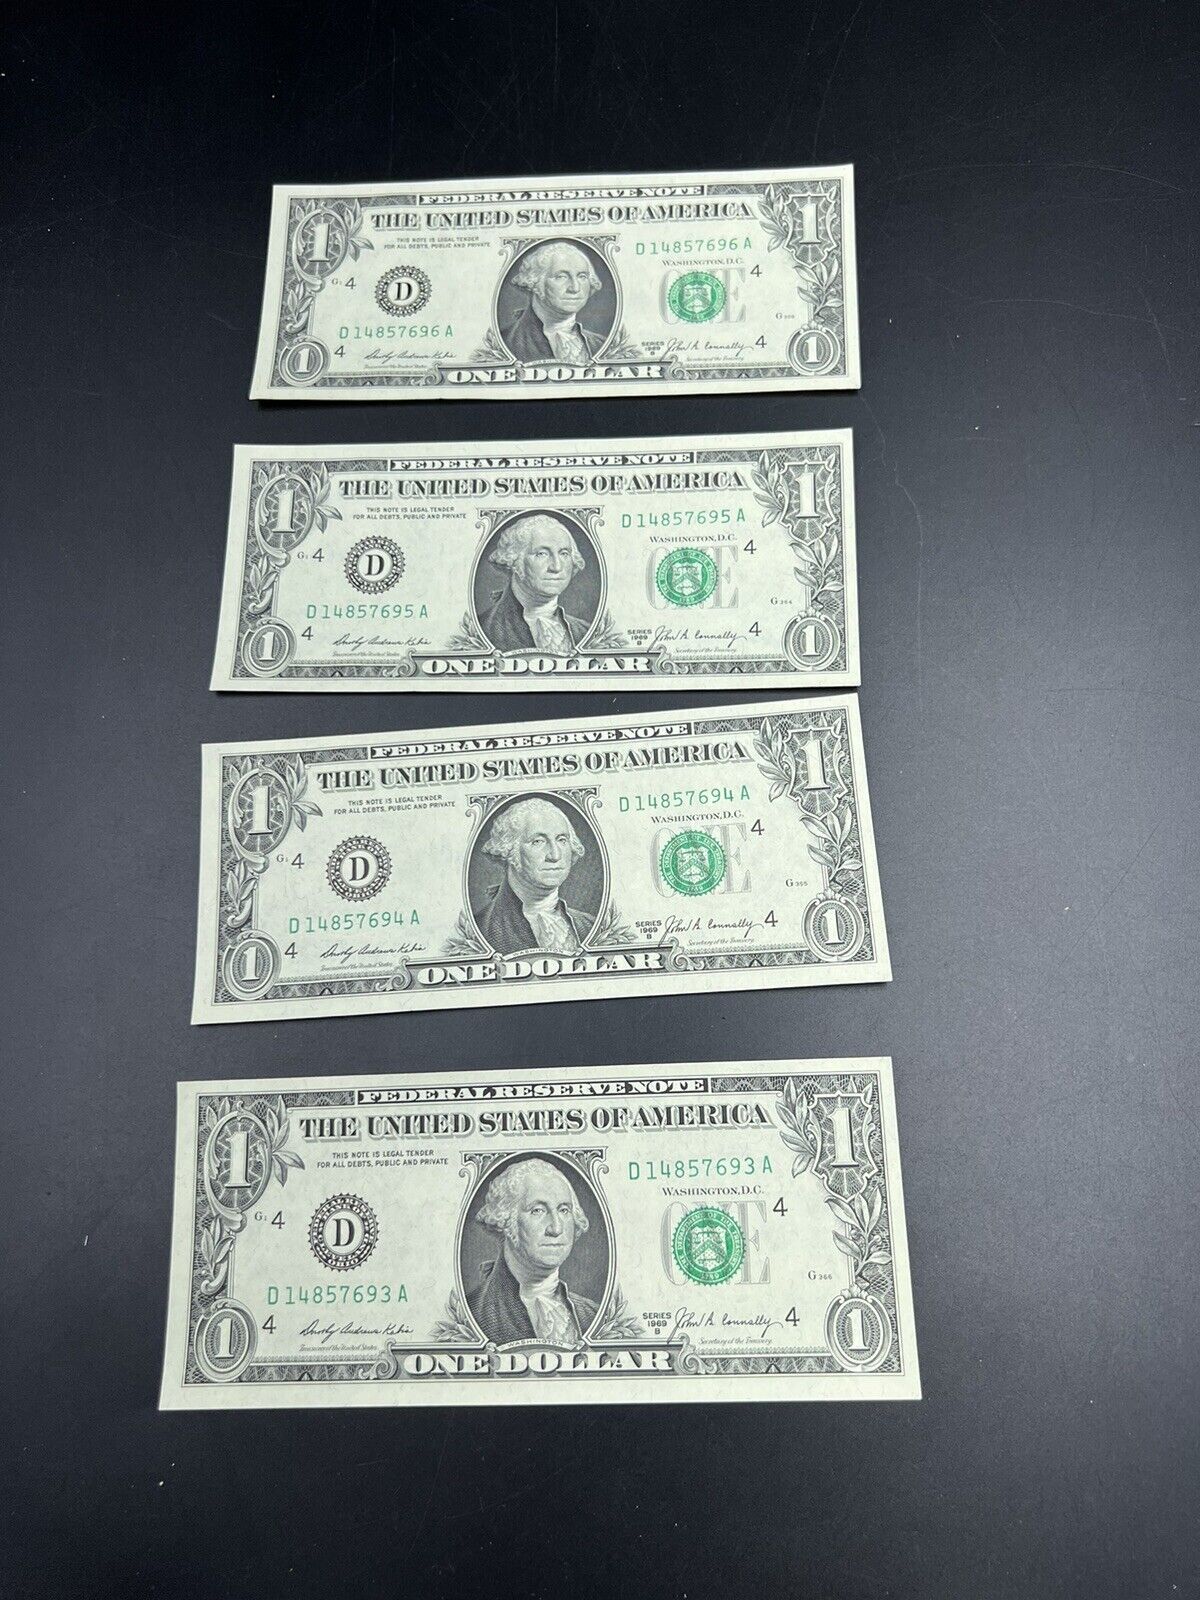 30 Consecutive Note Lot 1969 B $1 FRN Federal Reserve US Currency Bills CH UNC